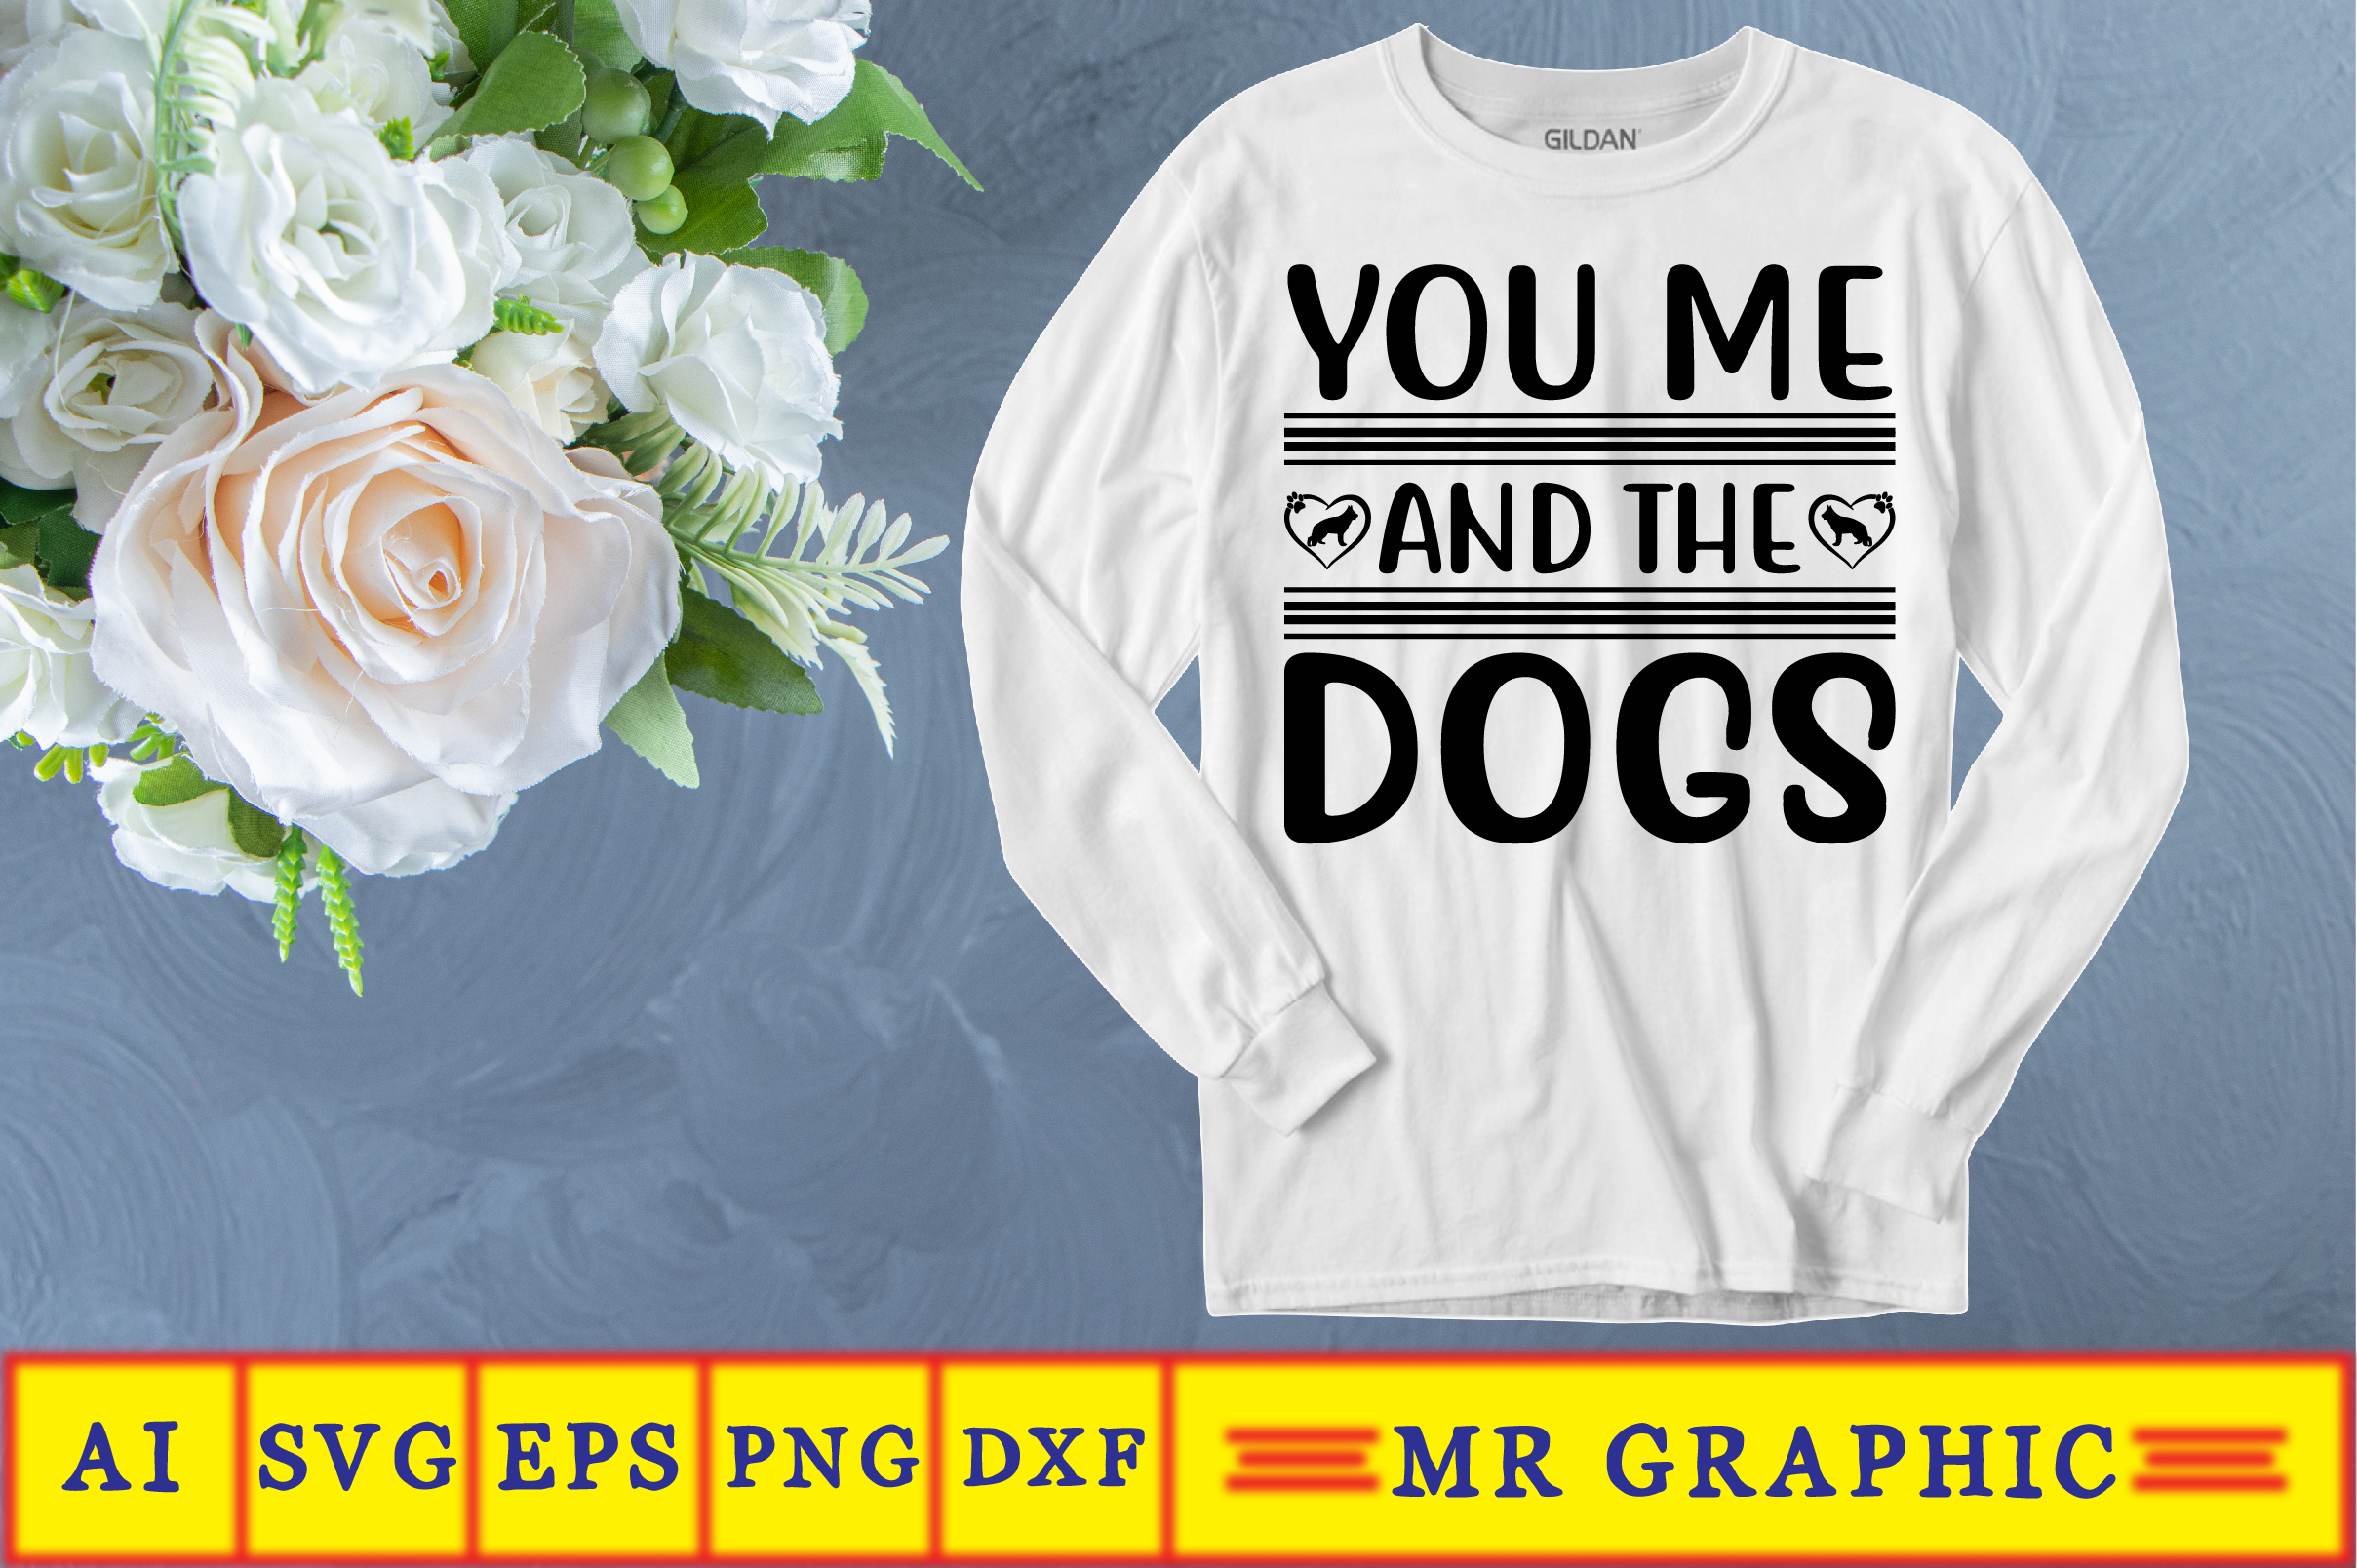 Image of a sweatshirt with the enchanting inscription You Me and the Dogs